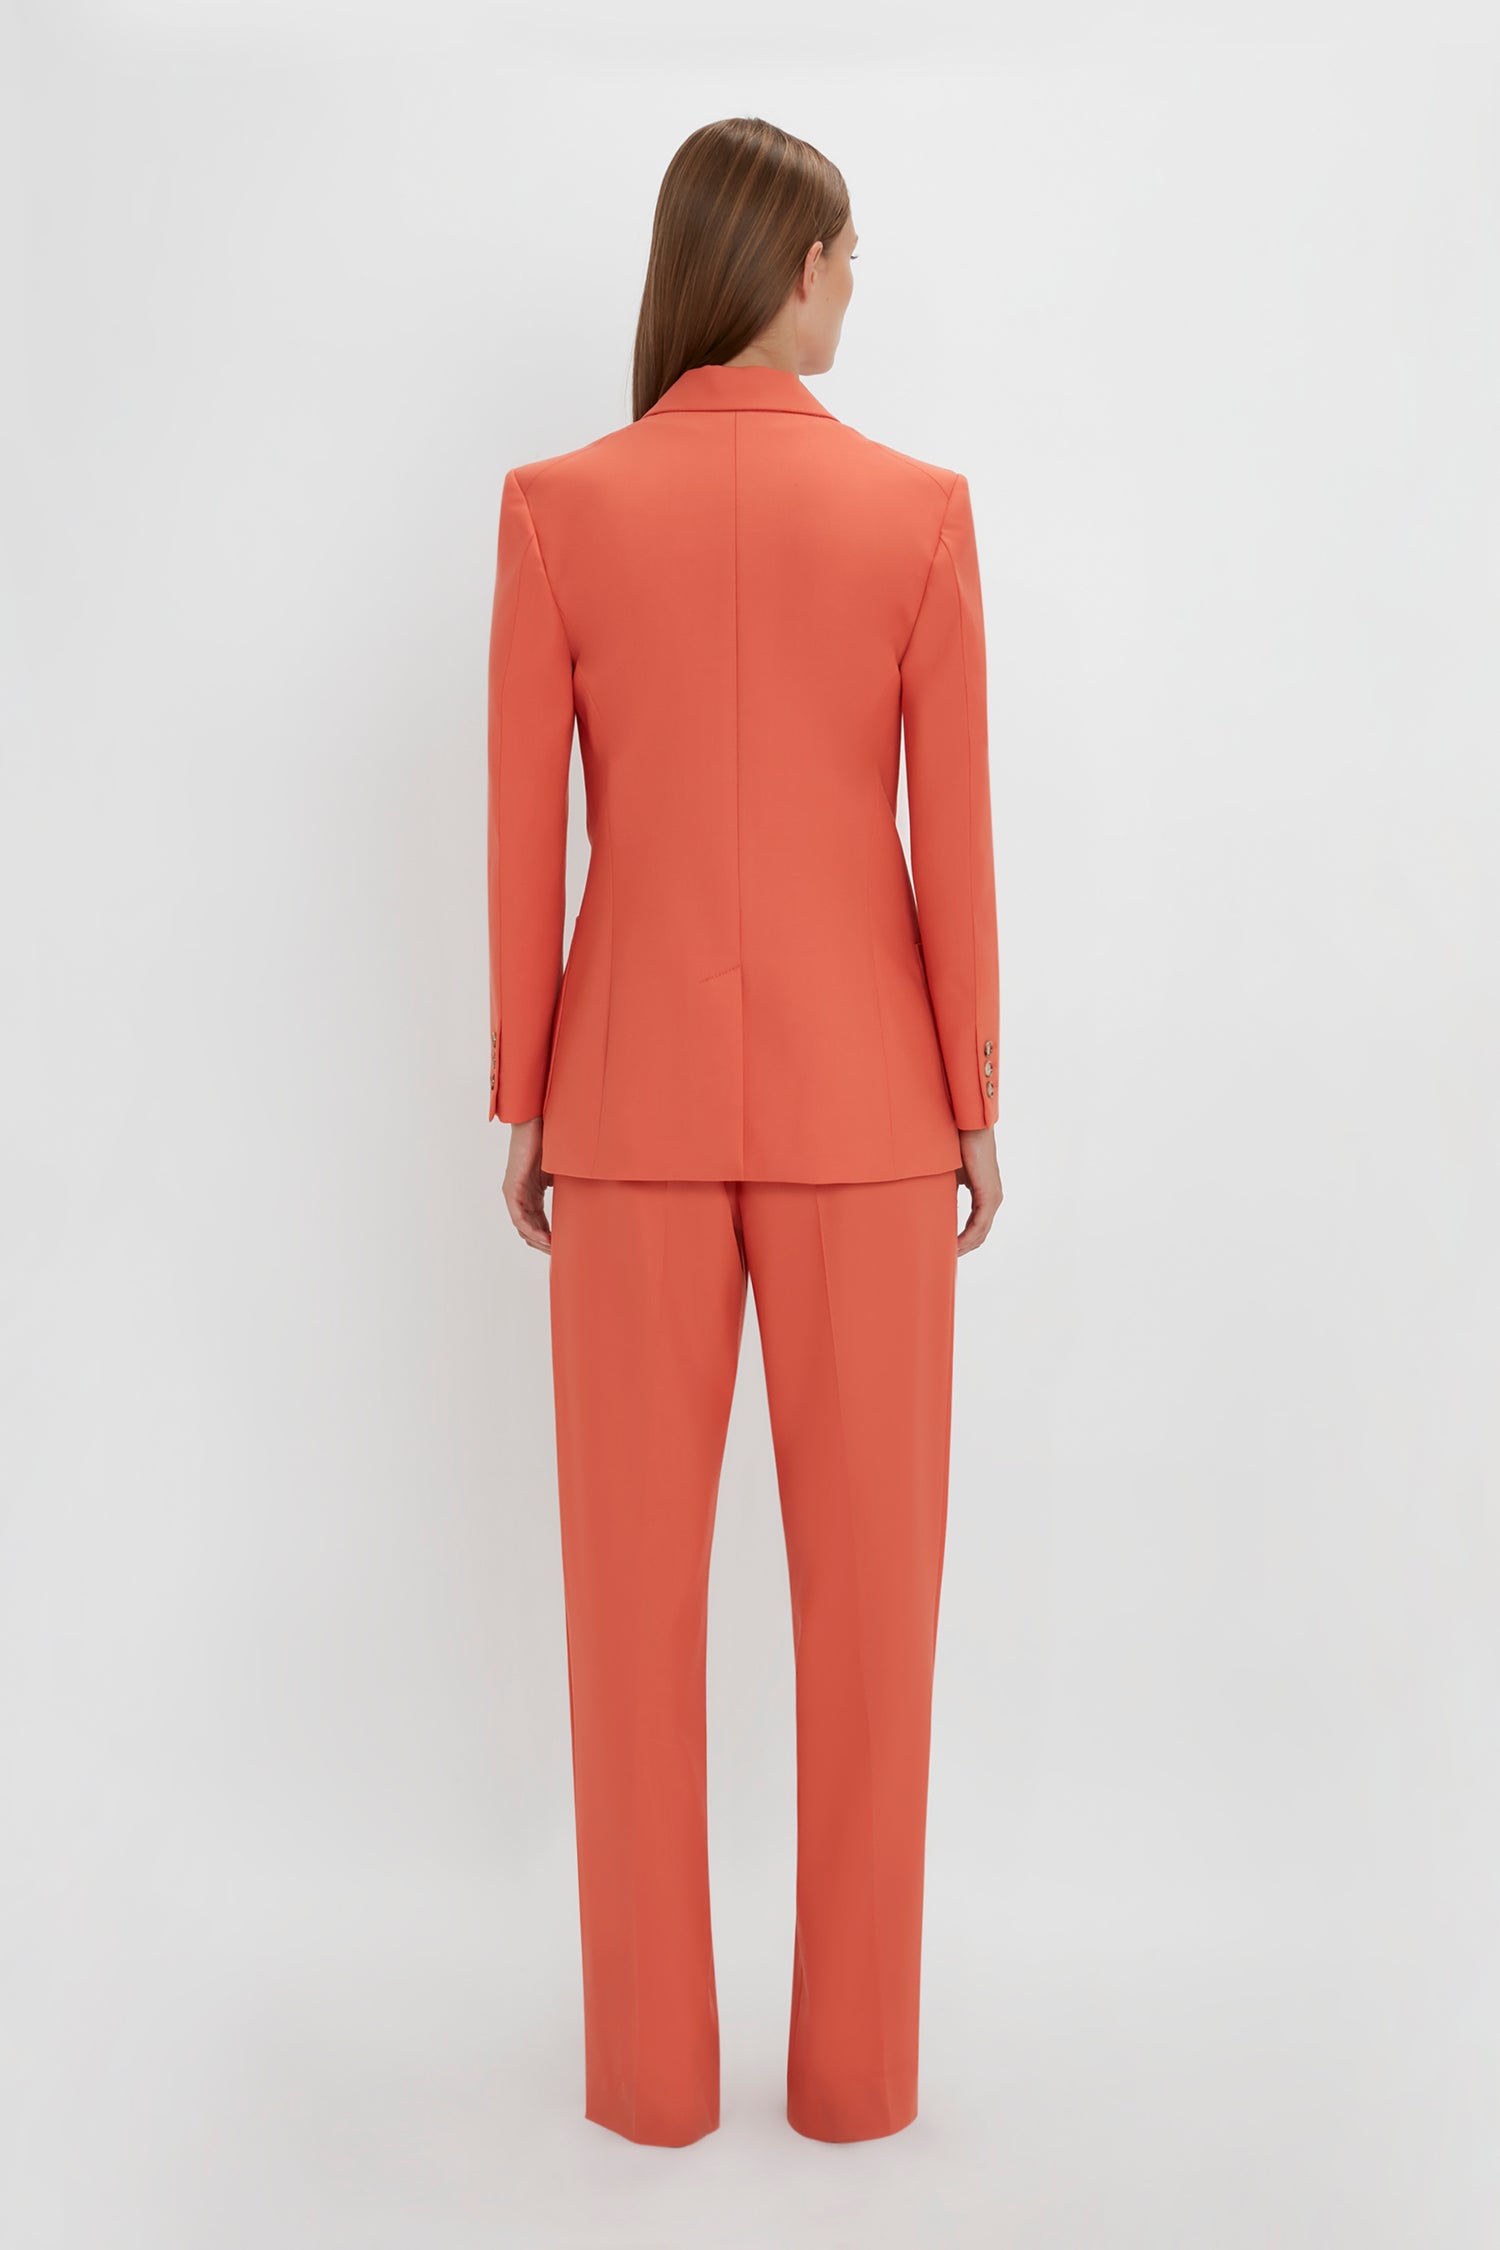 Rear view of a woman standing against a white background, wearing a Victoria Beckham tailored fit orange suit with straight-leg trousers.